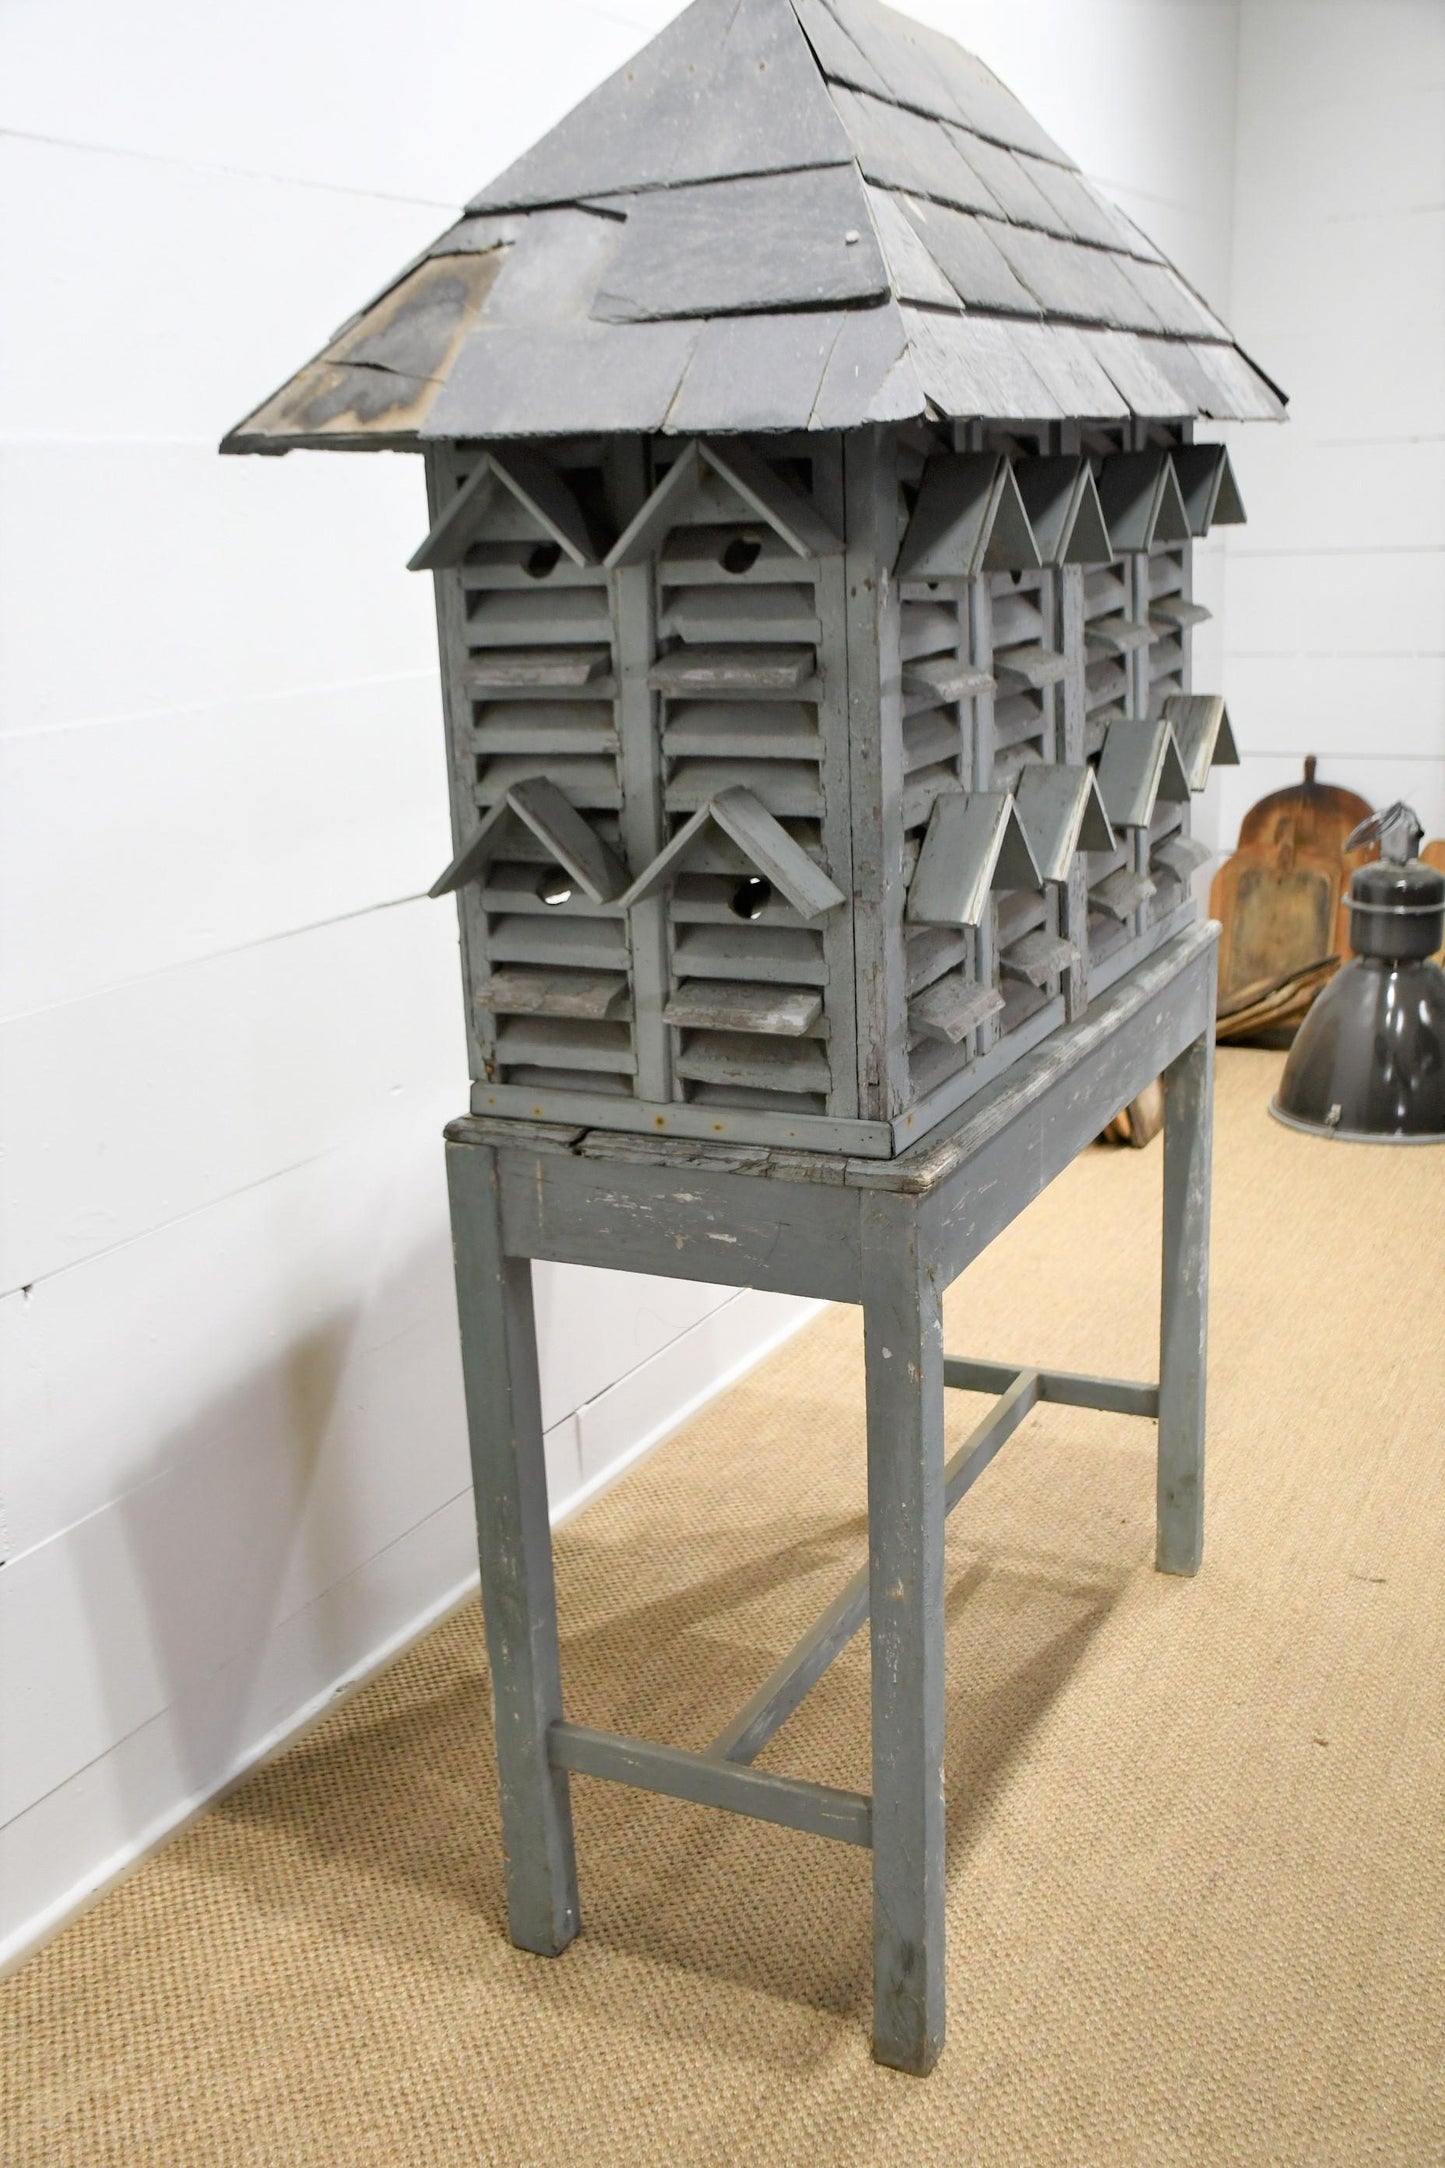 Large French Garden Bird House w/ Slate Roof